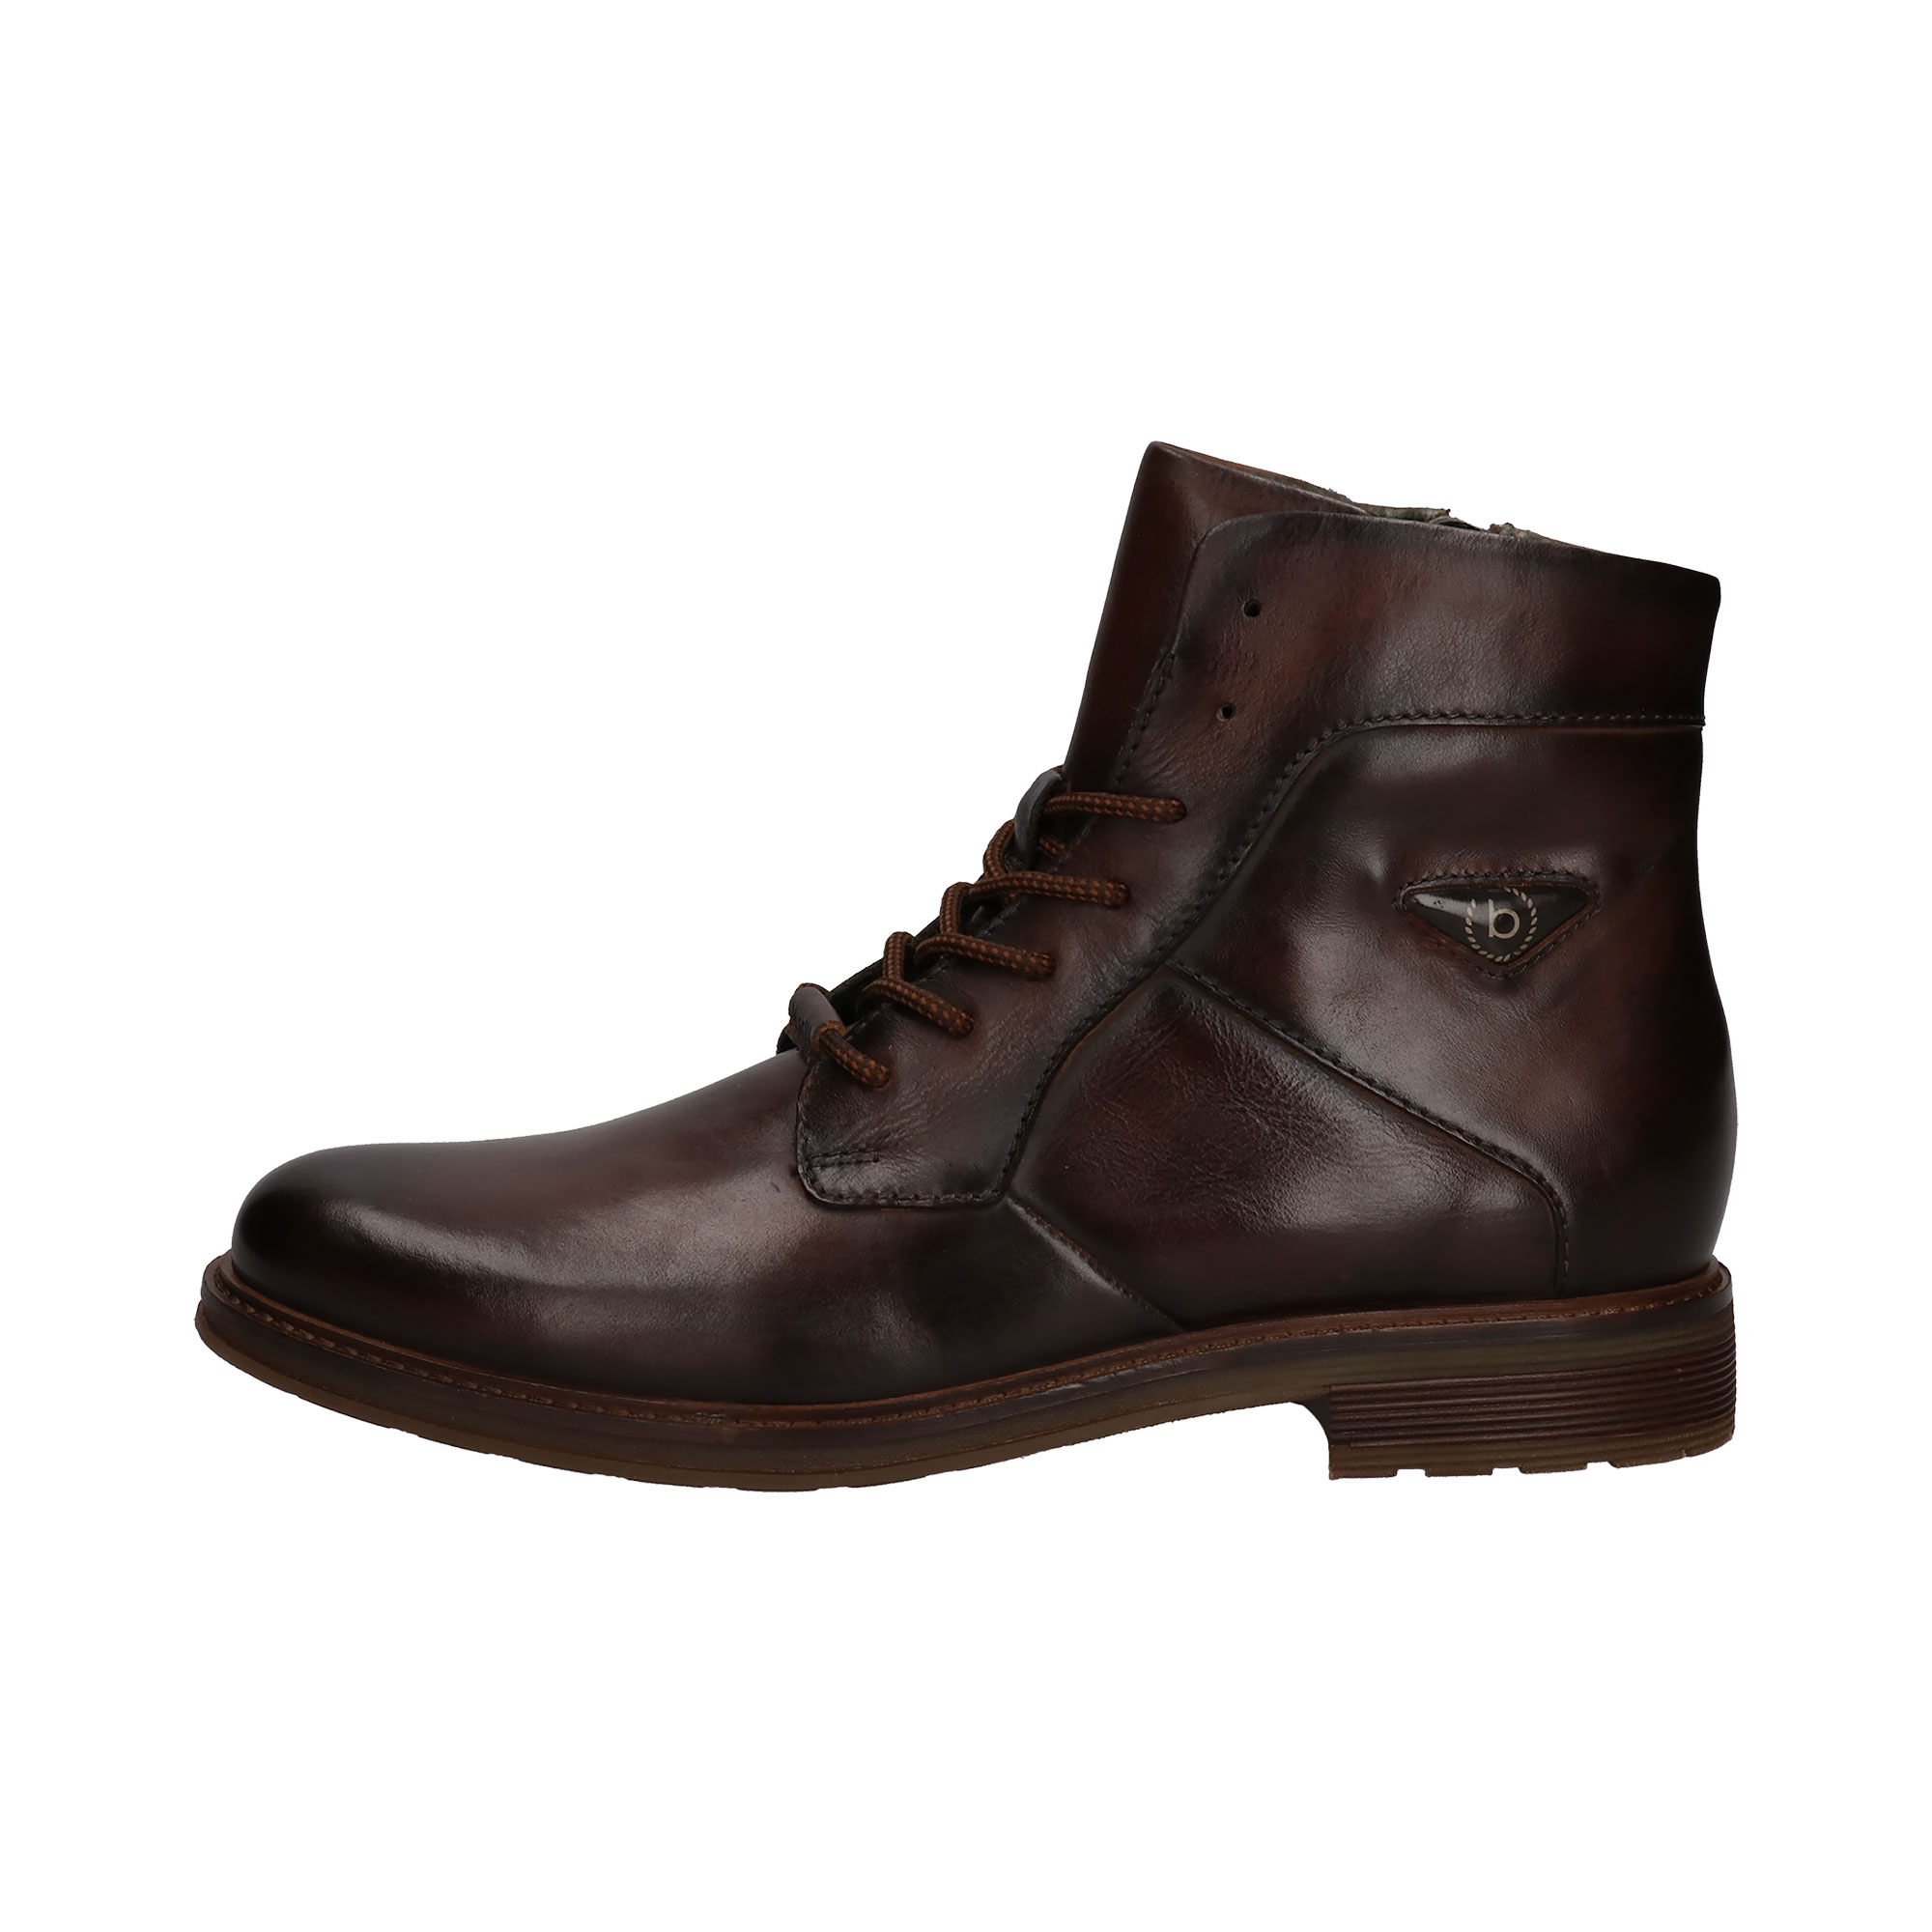 Mirato - Brown smooth leather